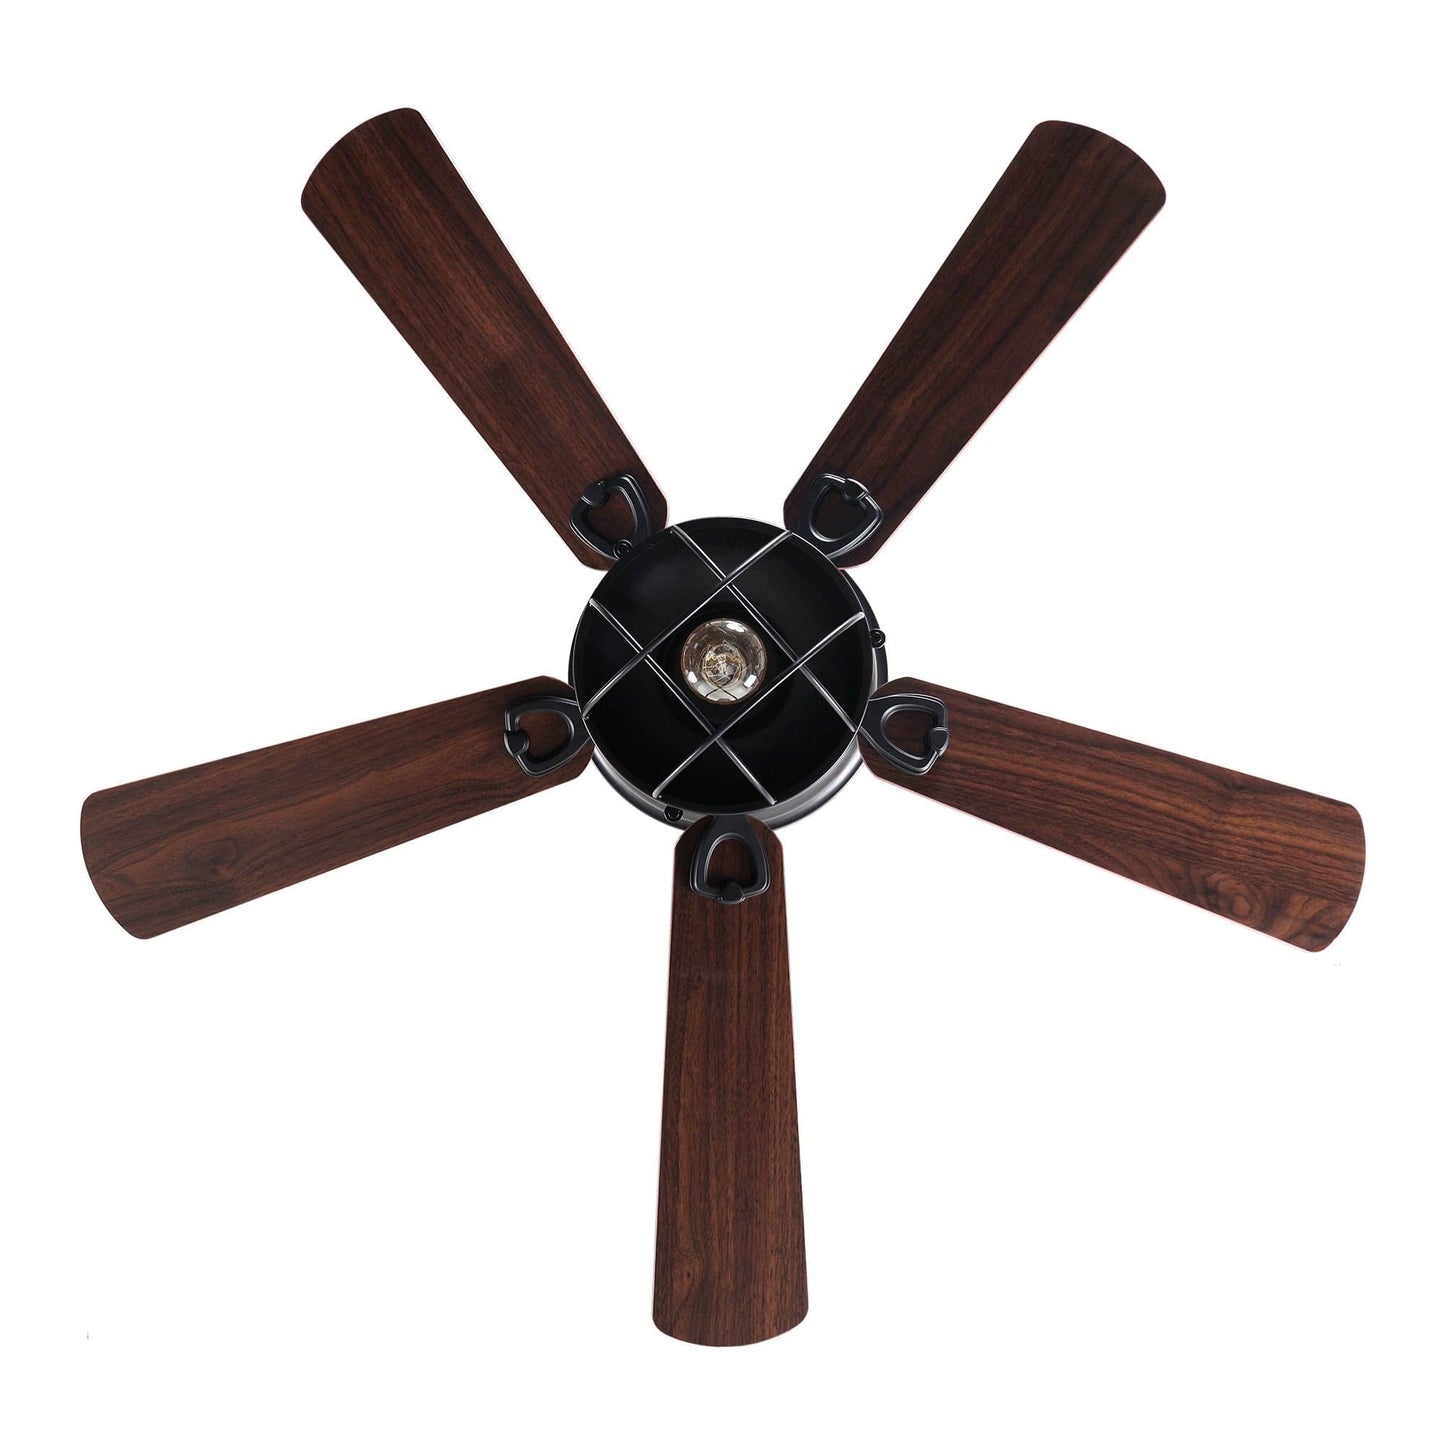 Parrot Uncle 42" Traditional Flush Mount Reversible Ceiling Fan with Lighting and Remote Control